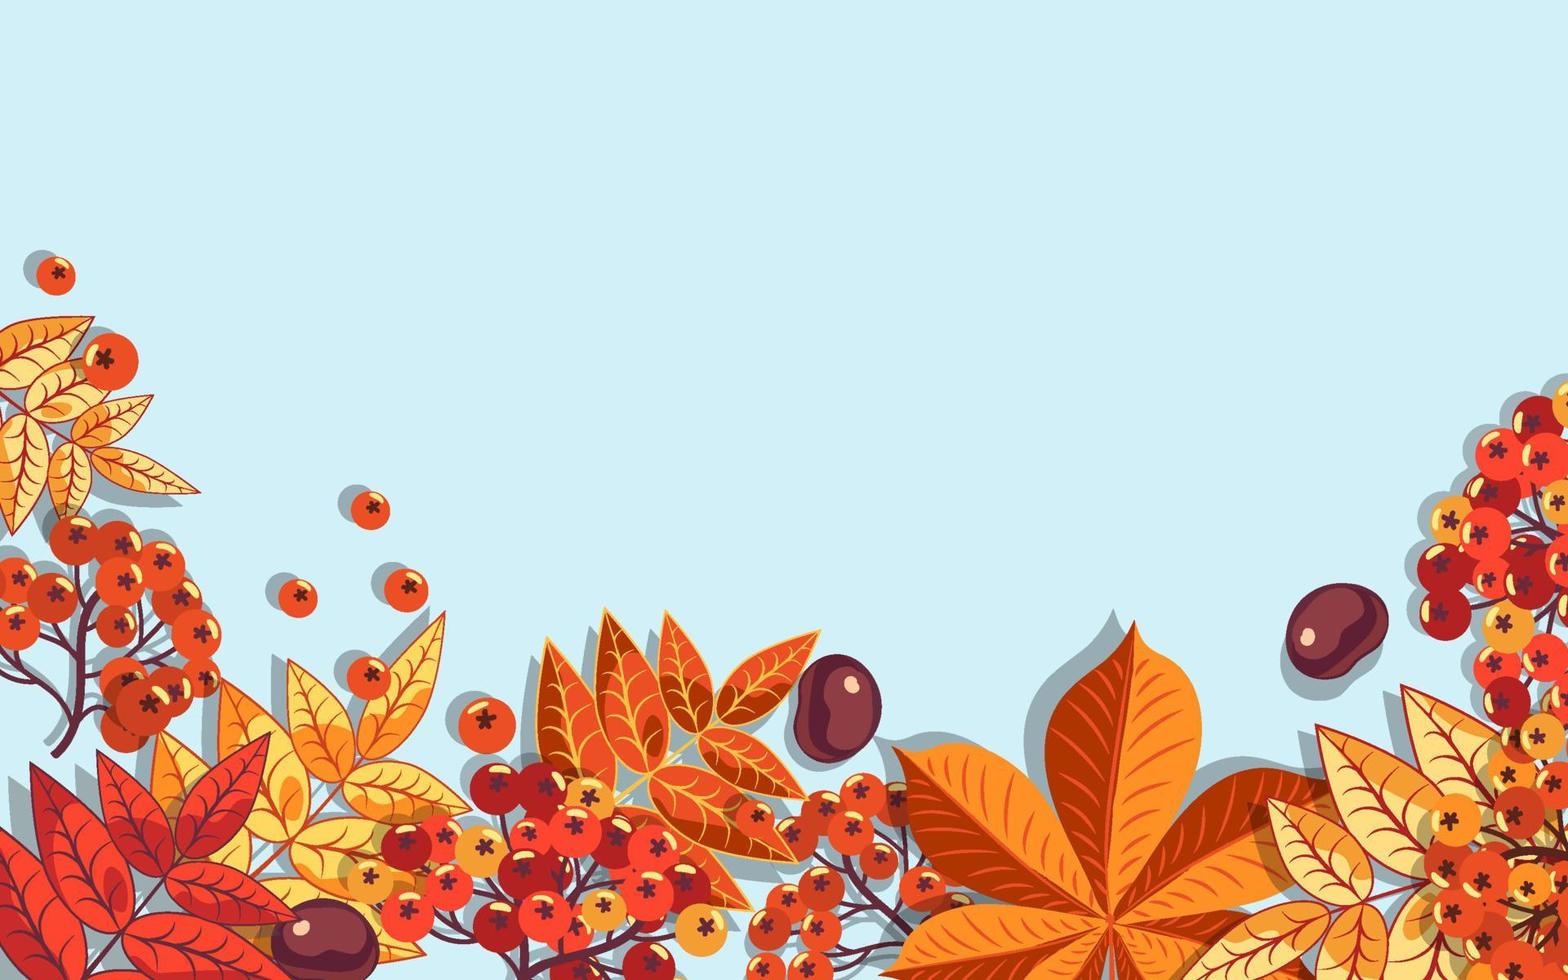 Autumn background of red rowan berries and yellow chestnut leaves on a blue background. vector